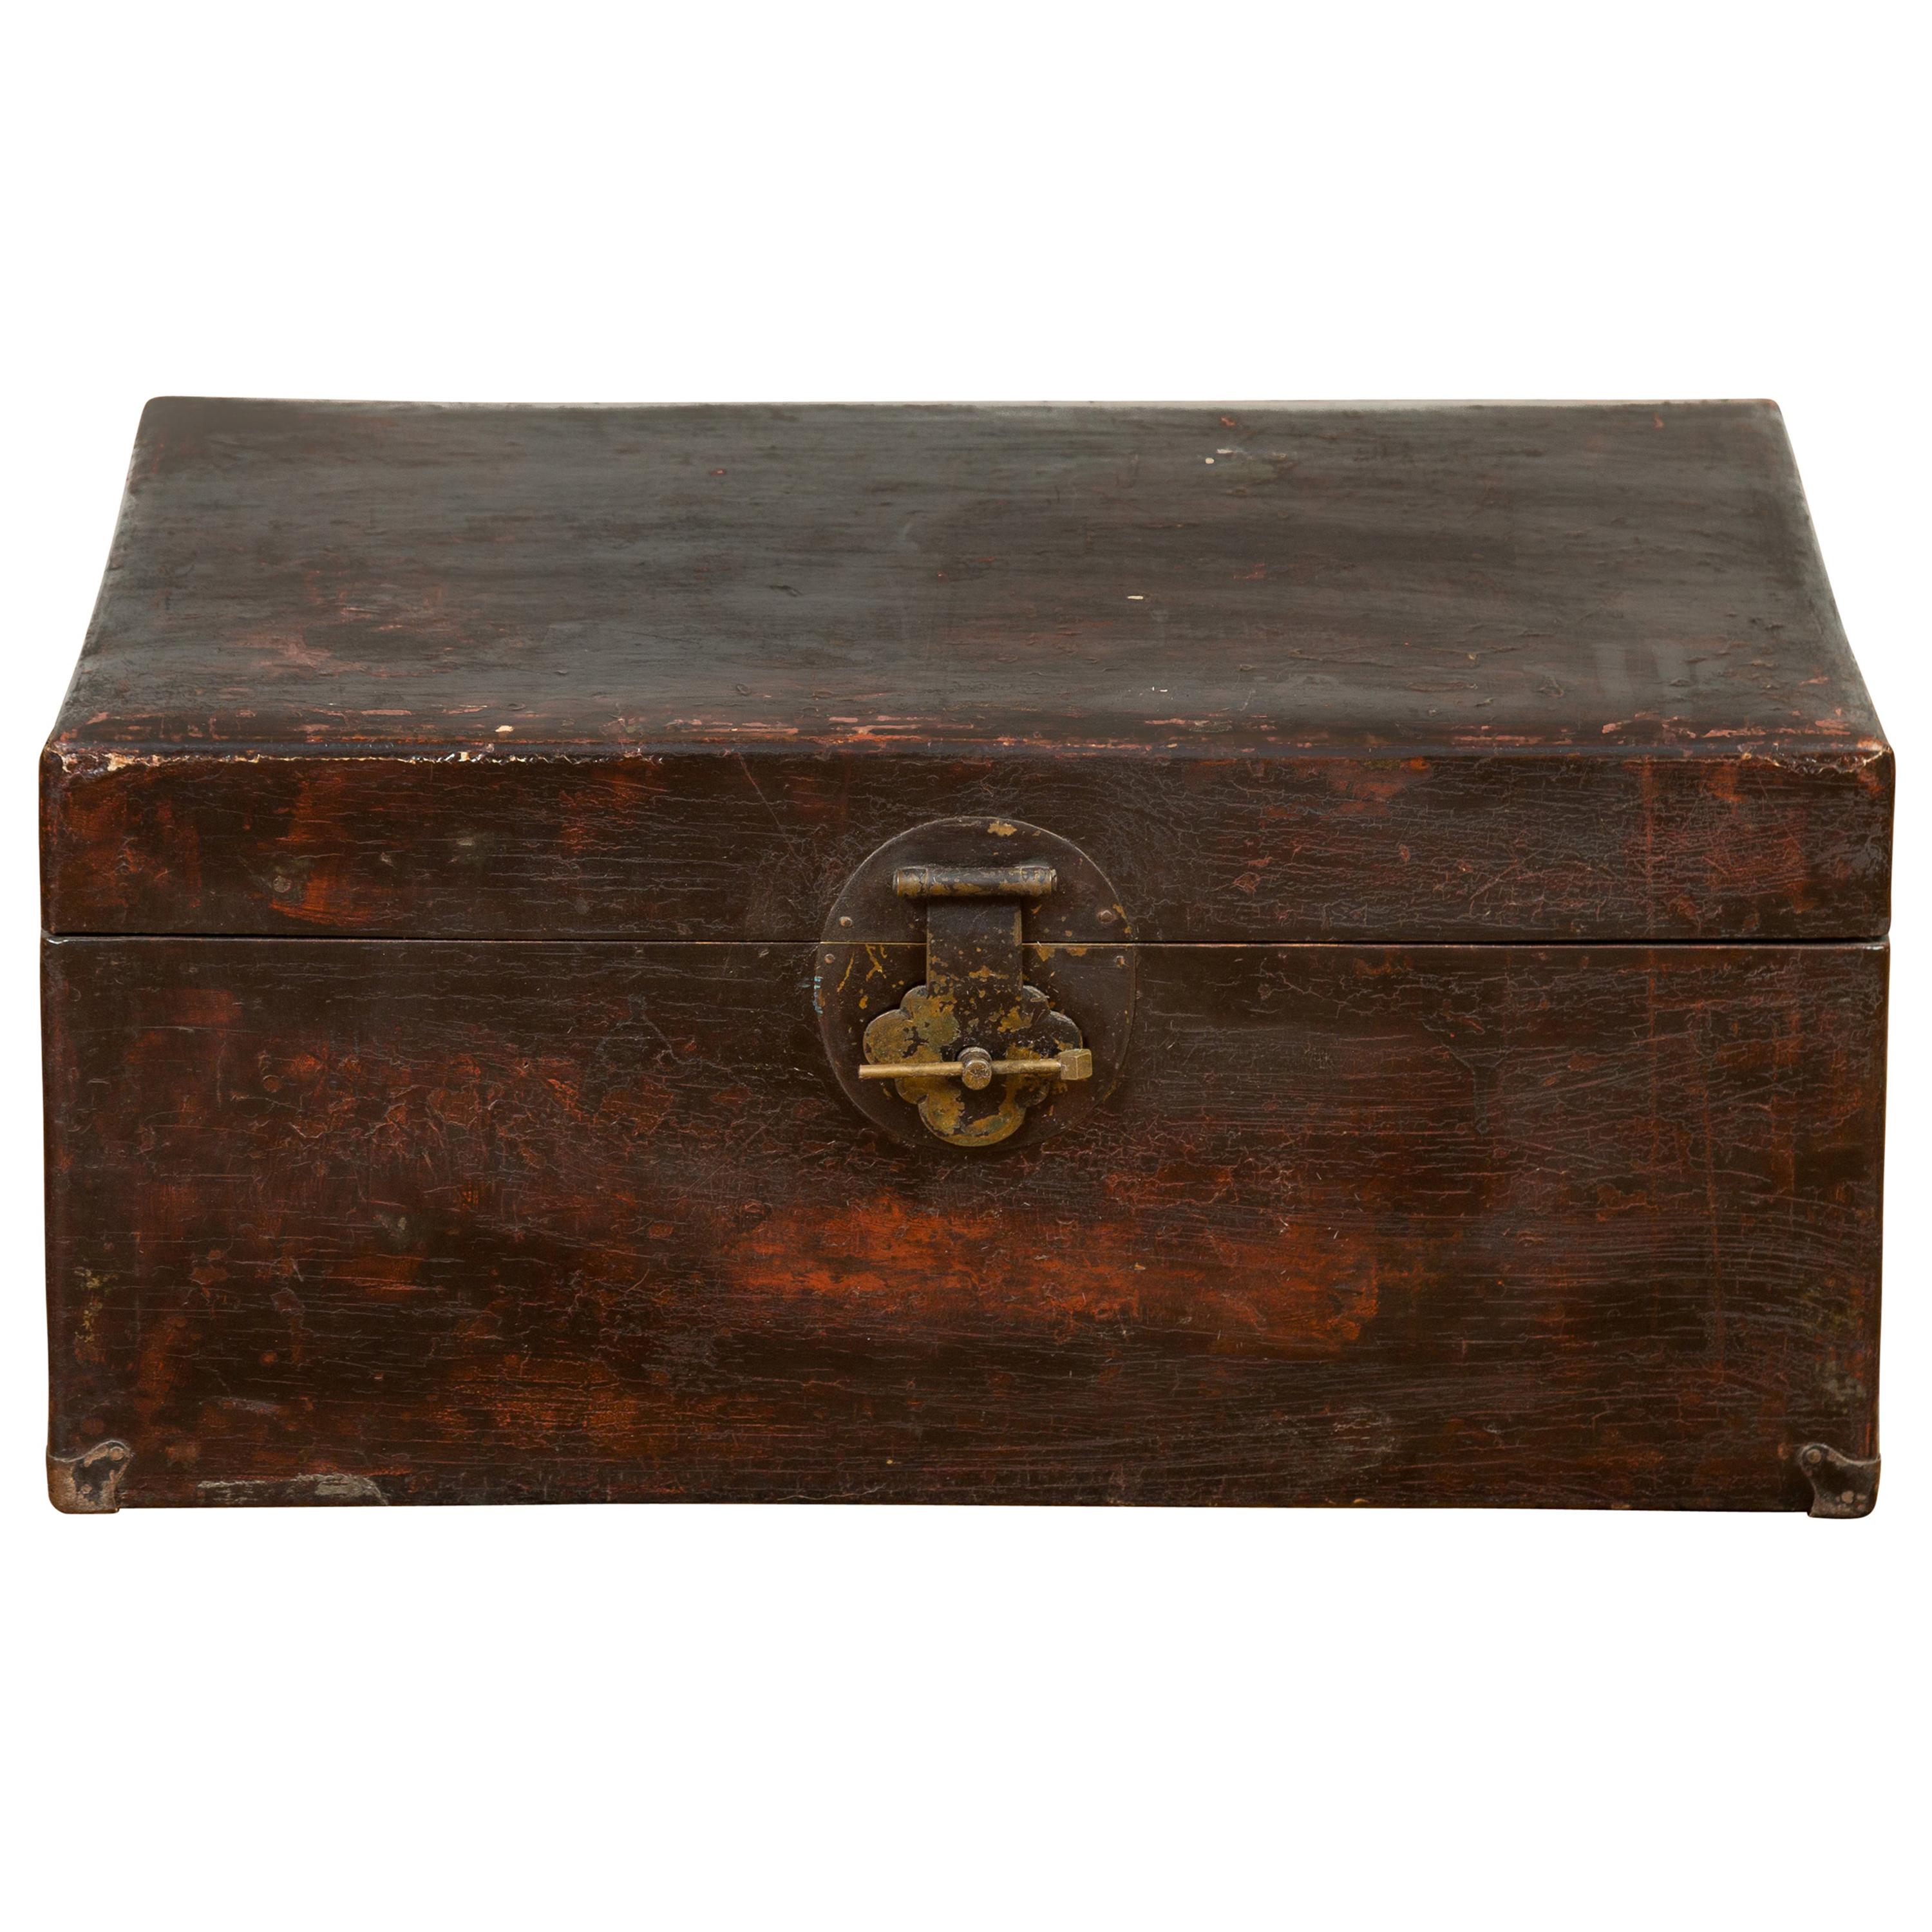 Chinese Qing Dynasty Camphor Blanket Chest with Distressed Patina and Brass Lock